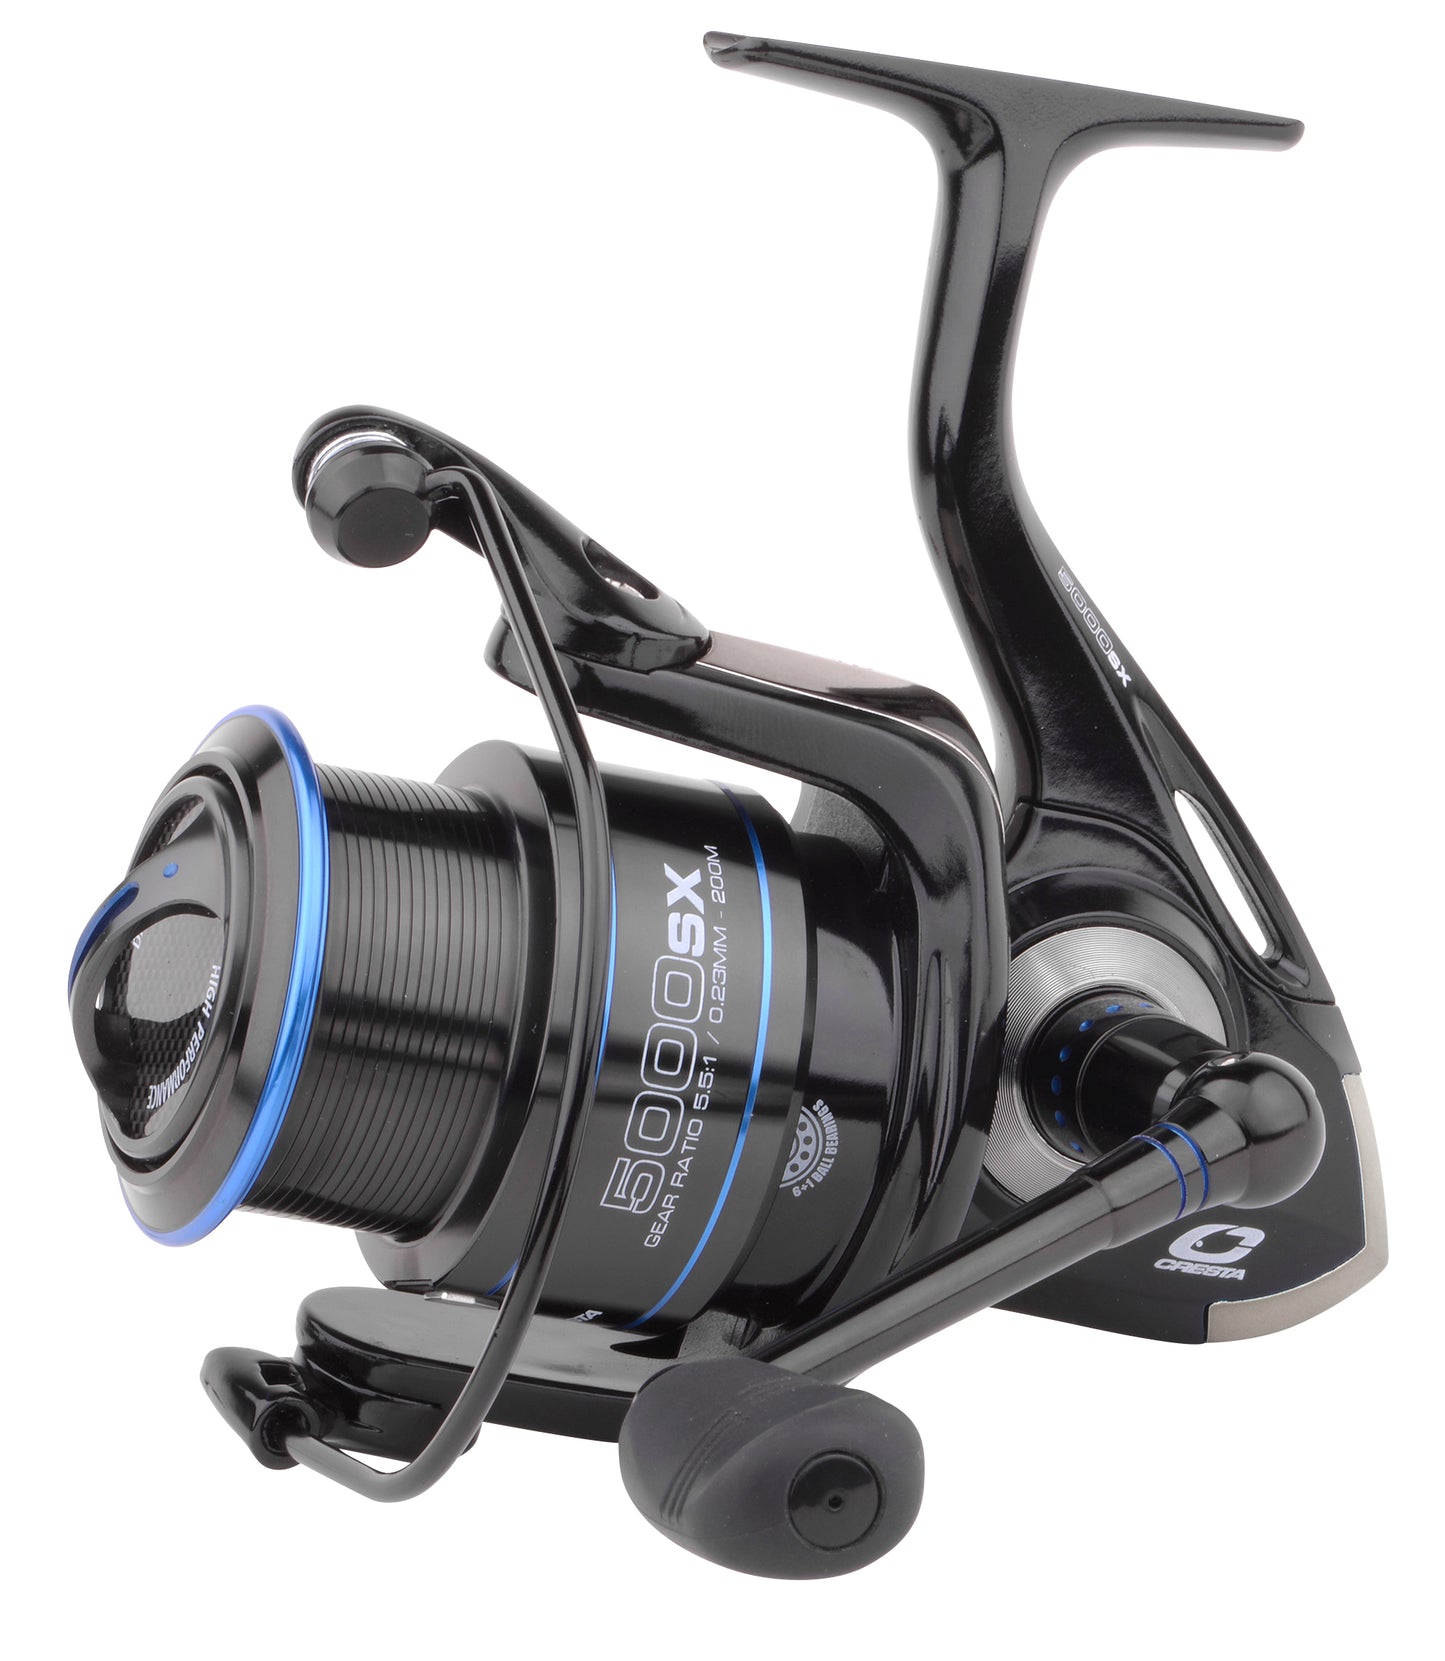 Solith 5000 SX Reel